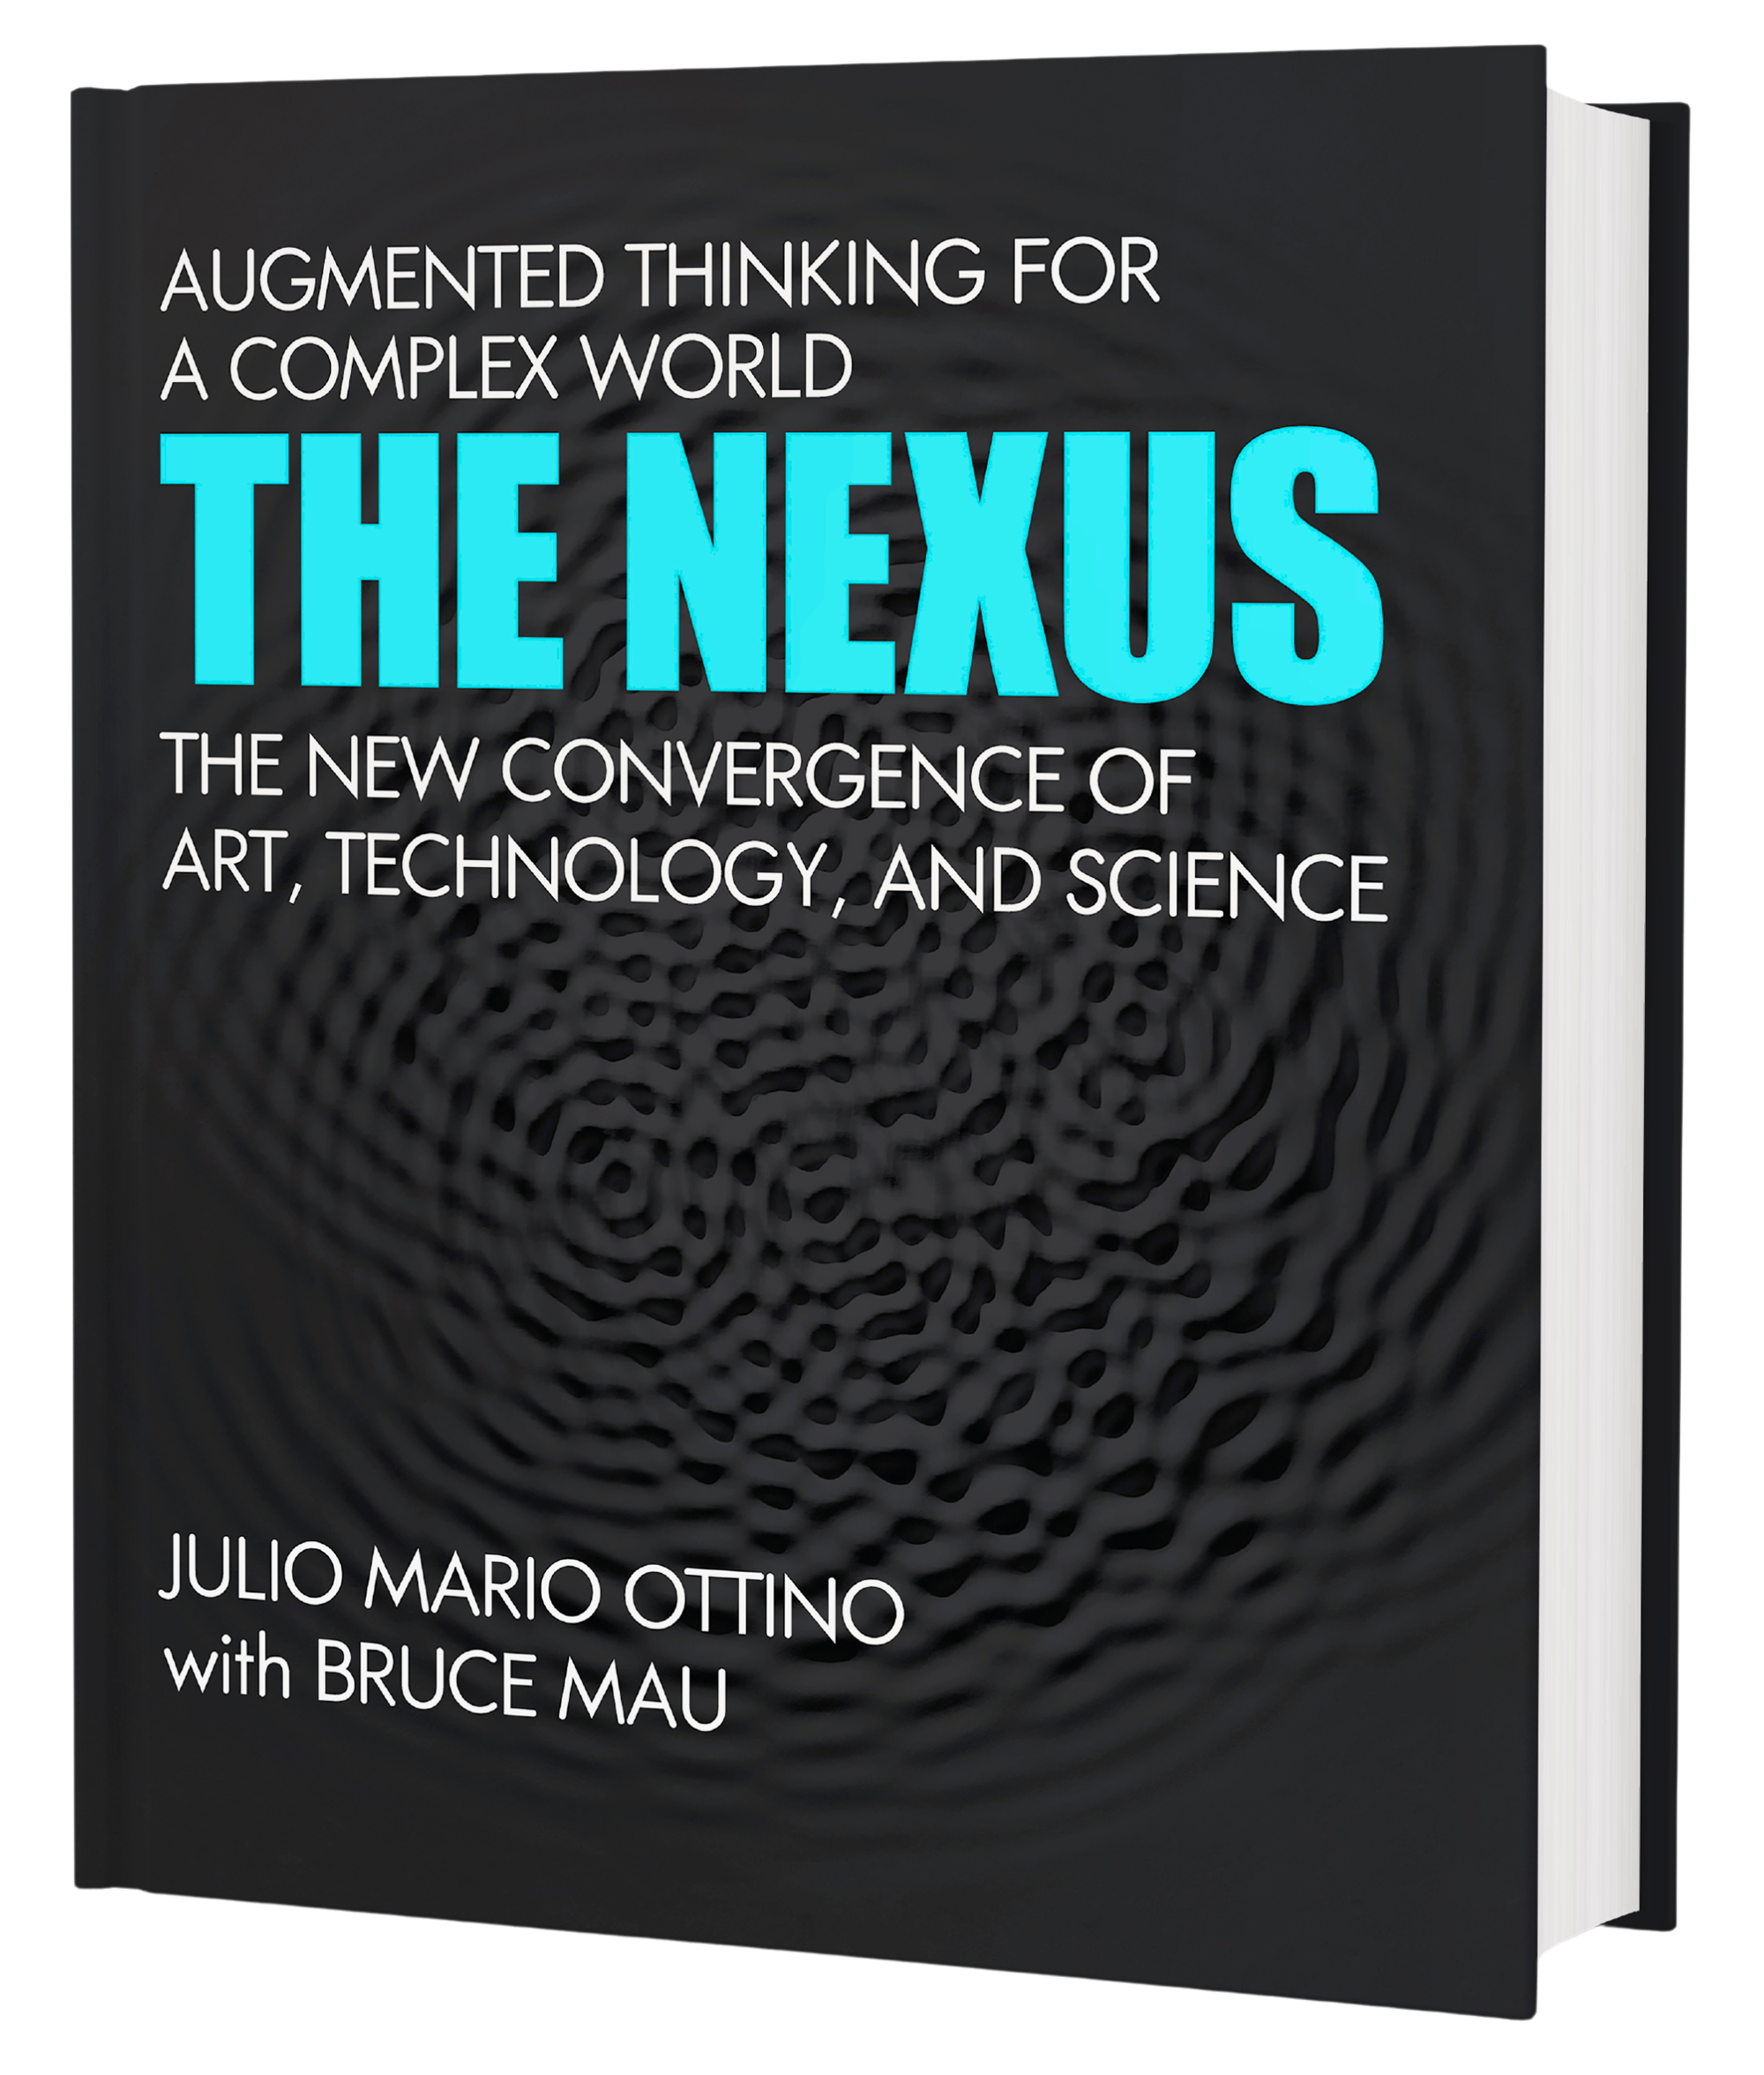 THE NEXUS Book, the new Convergence fo Art, Technology, and Science